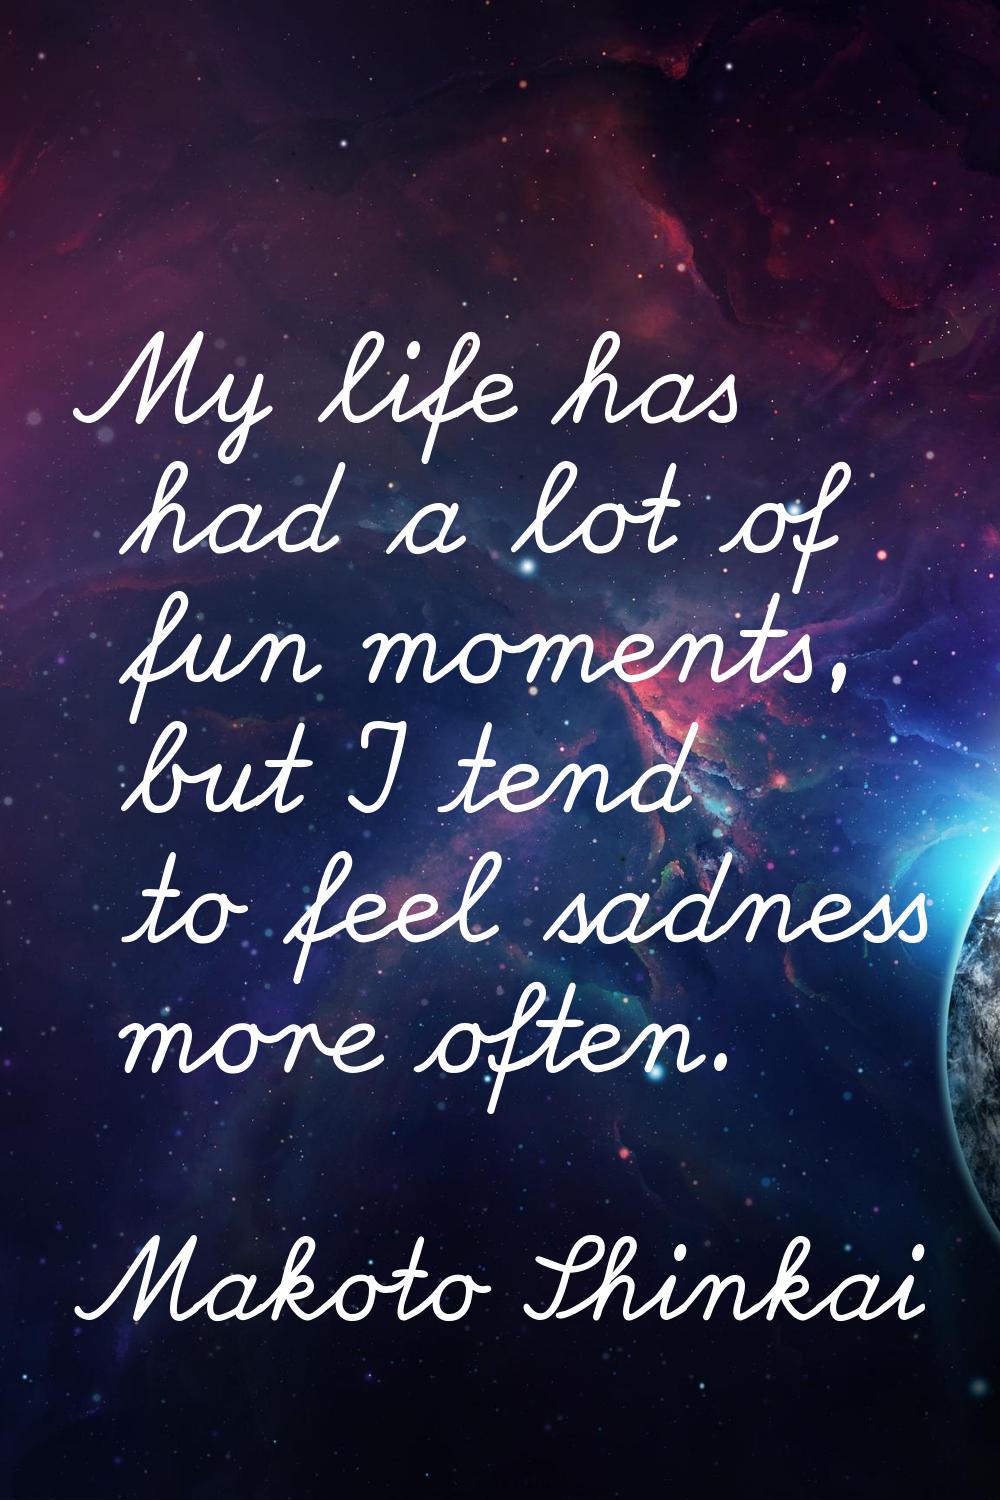 My life has had a lot of fun moments, but I tend to feel sadness more often.